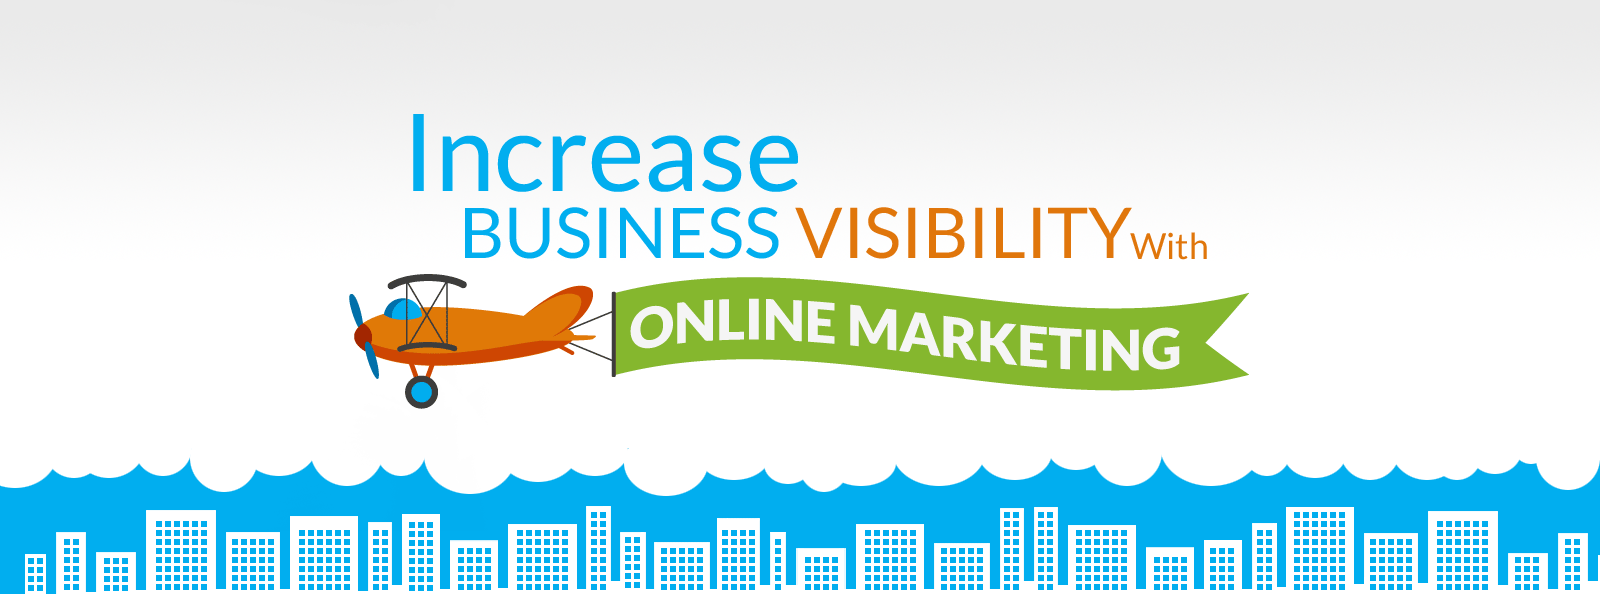 Business Visibility with Online Marketing